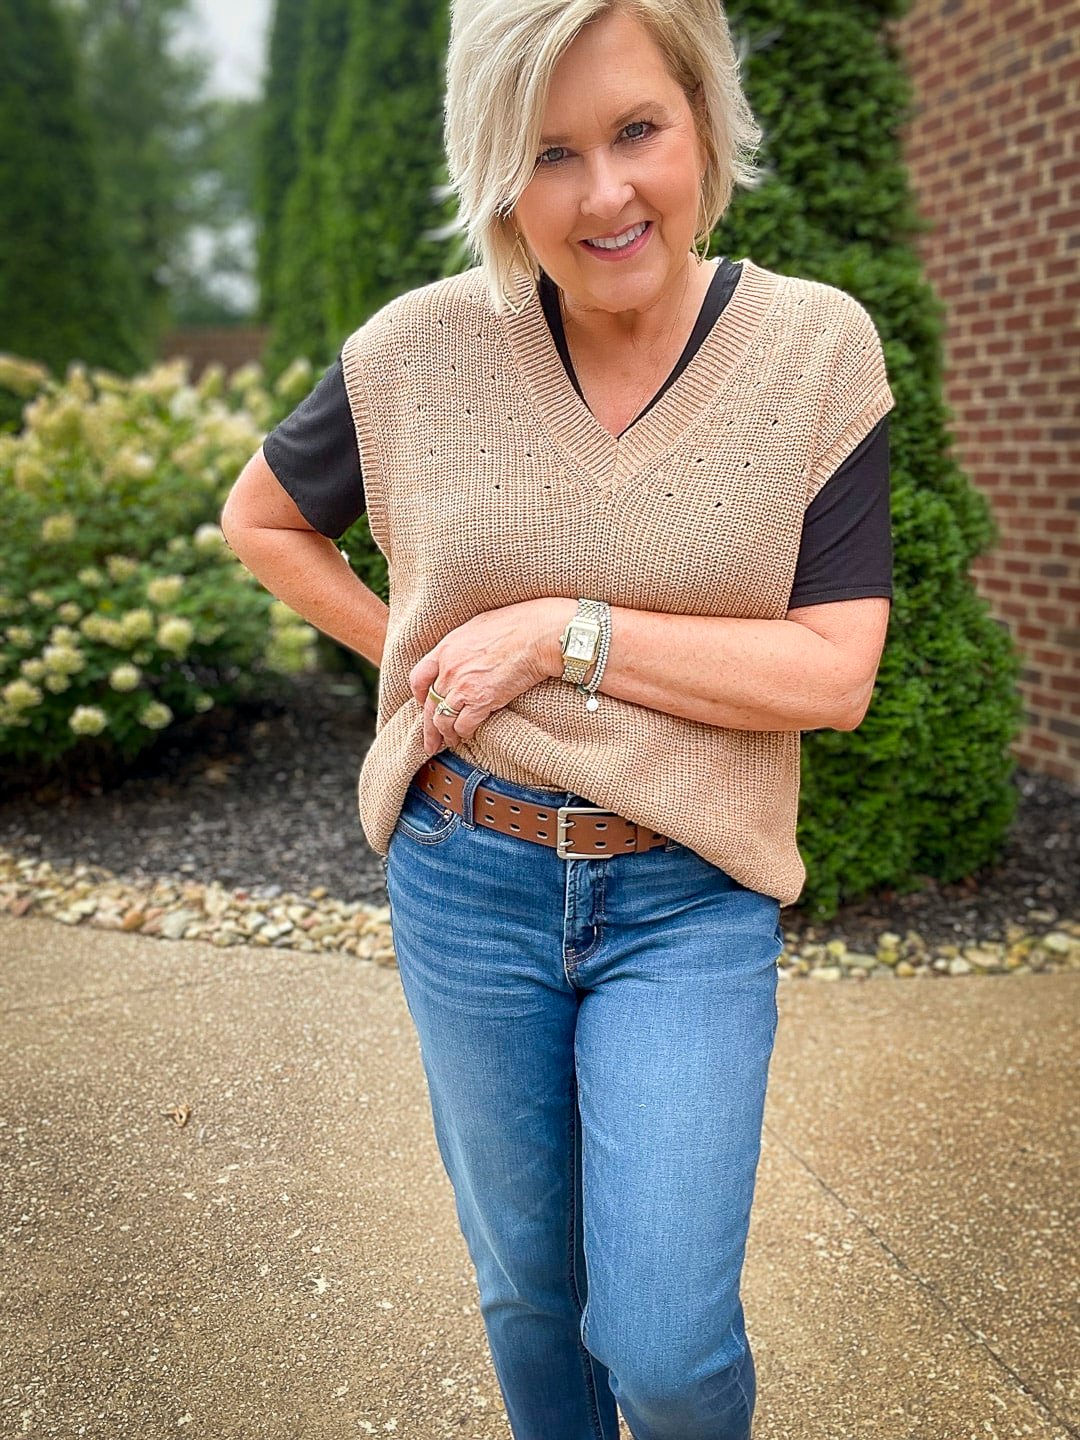 Over 40 Fashion Blogger, Tania Stephens is wearing a tan vest for fall from Walmart15